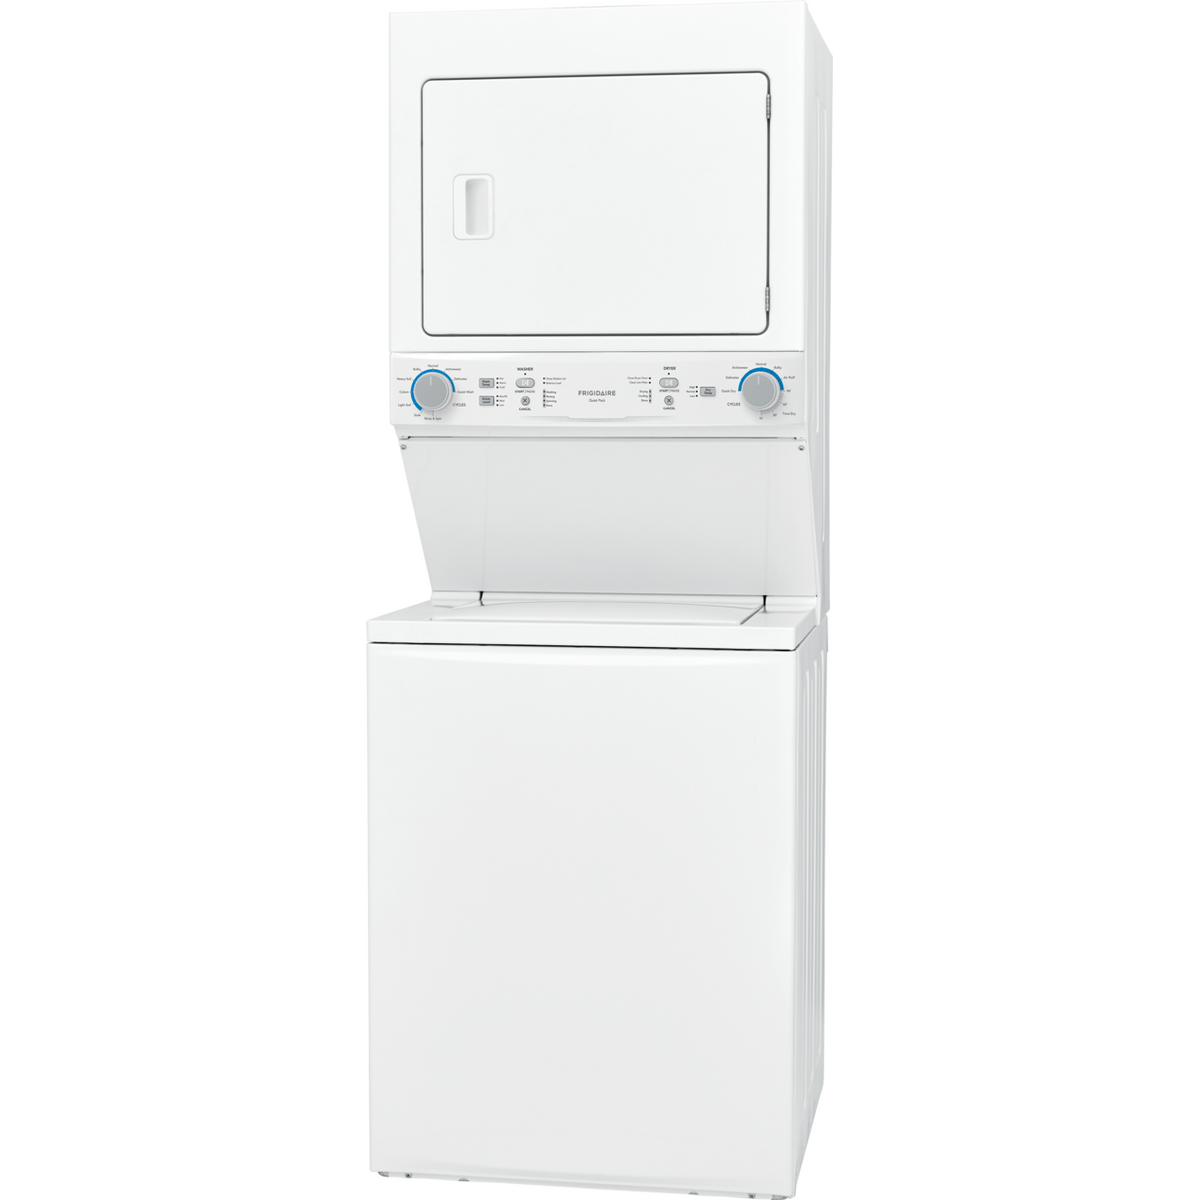 FRIGIDAIRE FLCE7522AW Electric Washer/Dryer Laundry Center